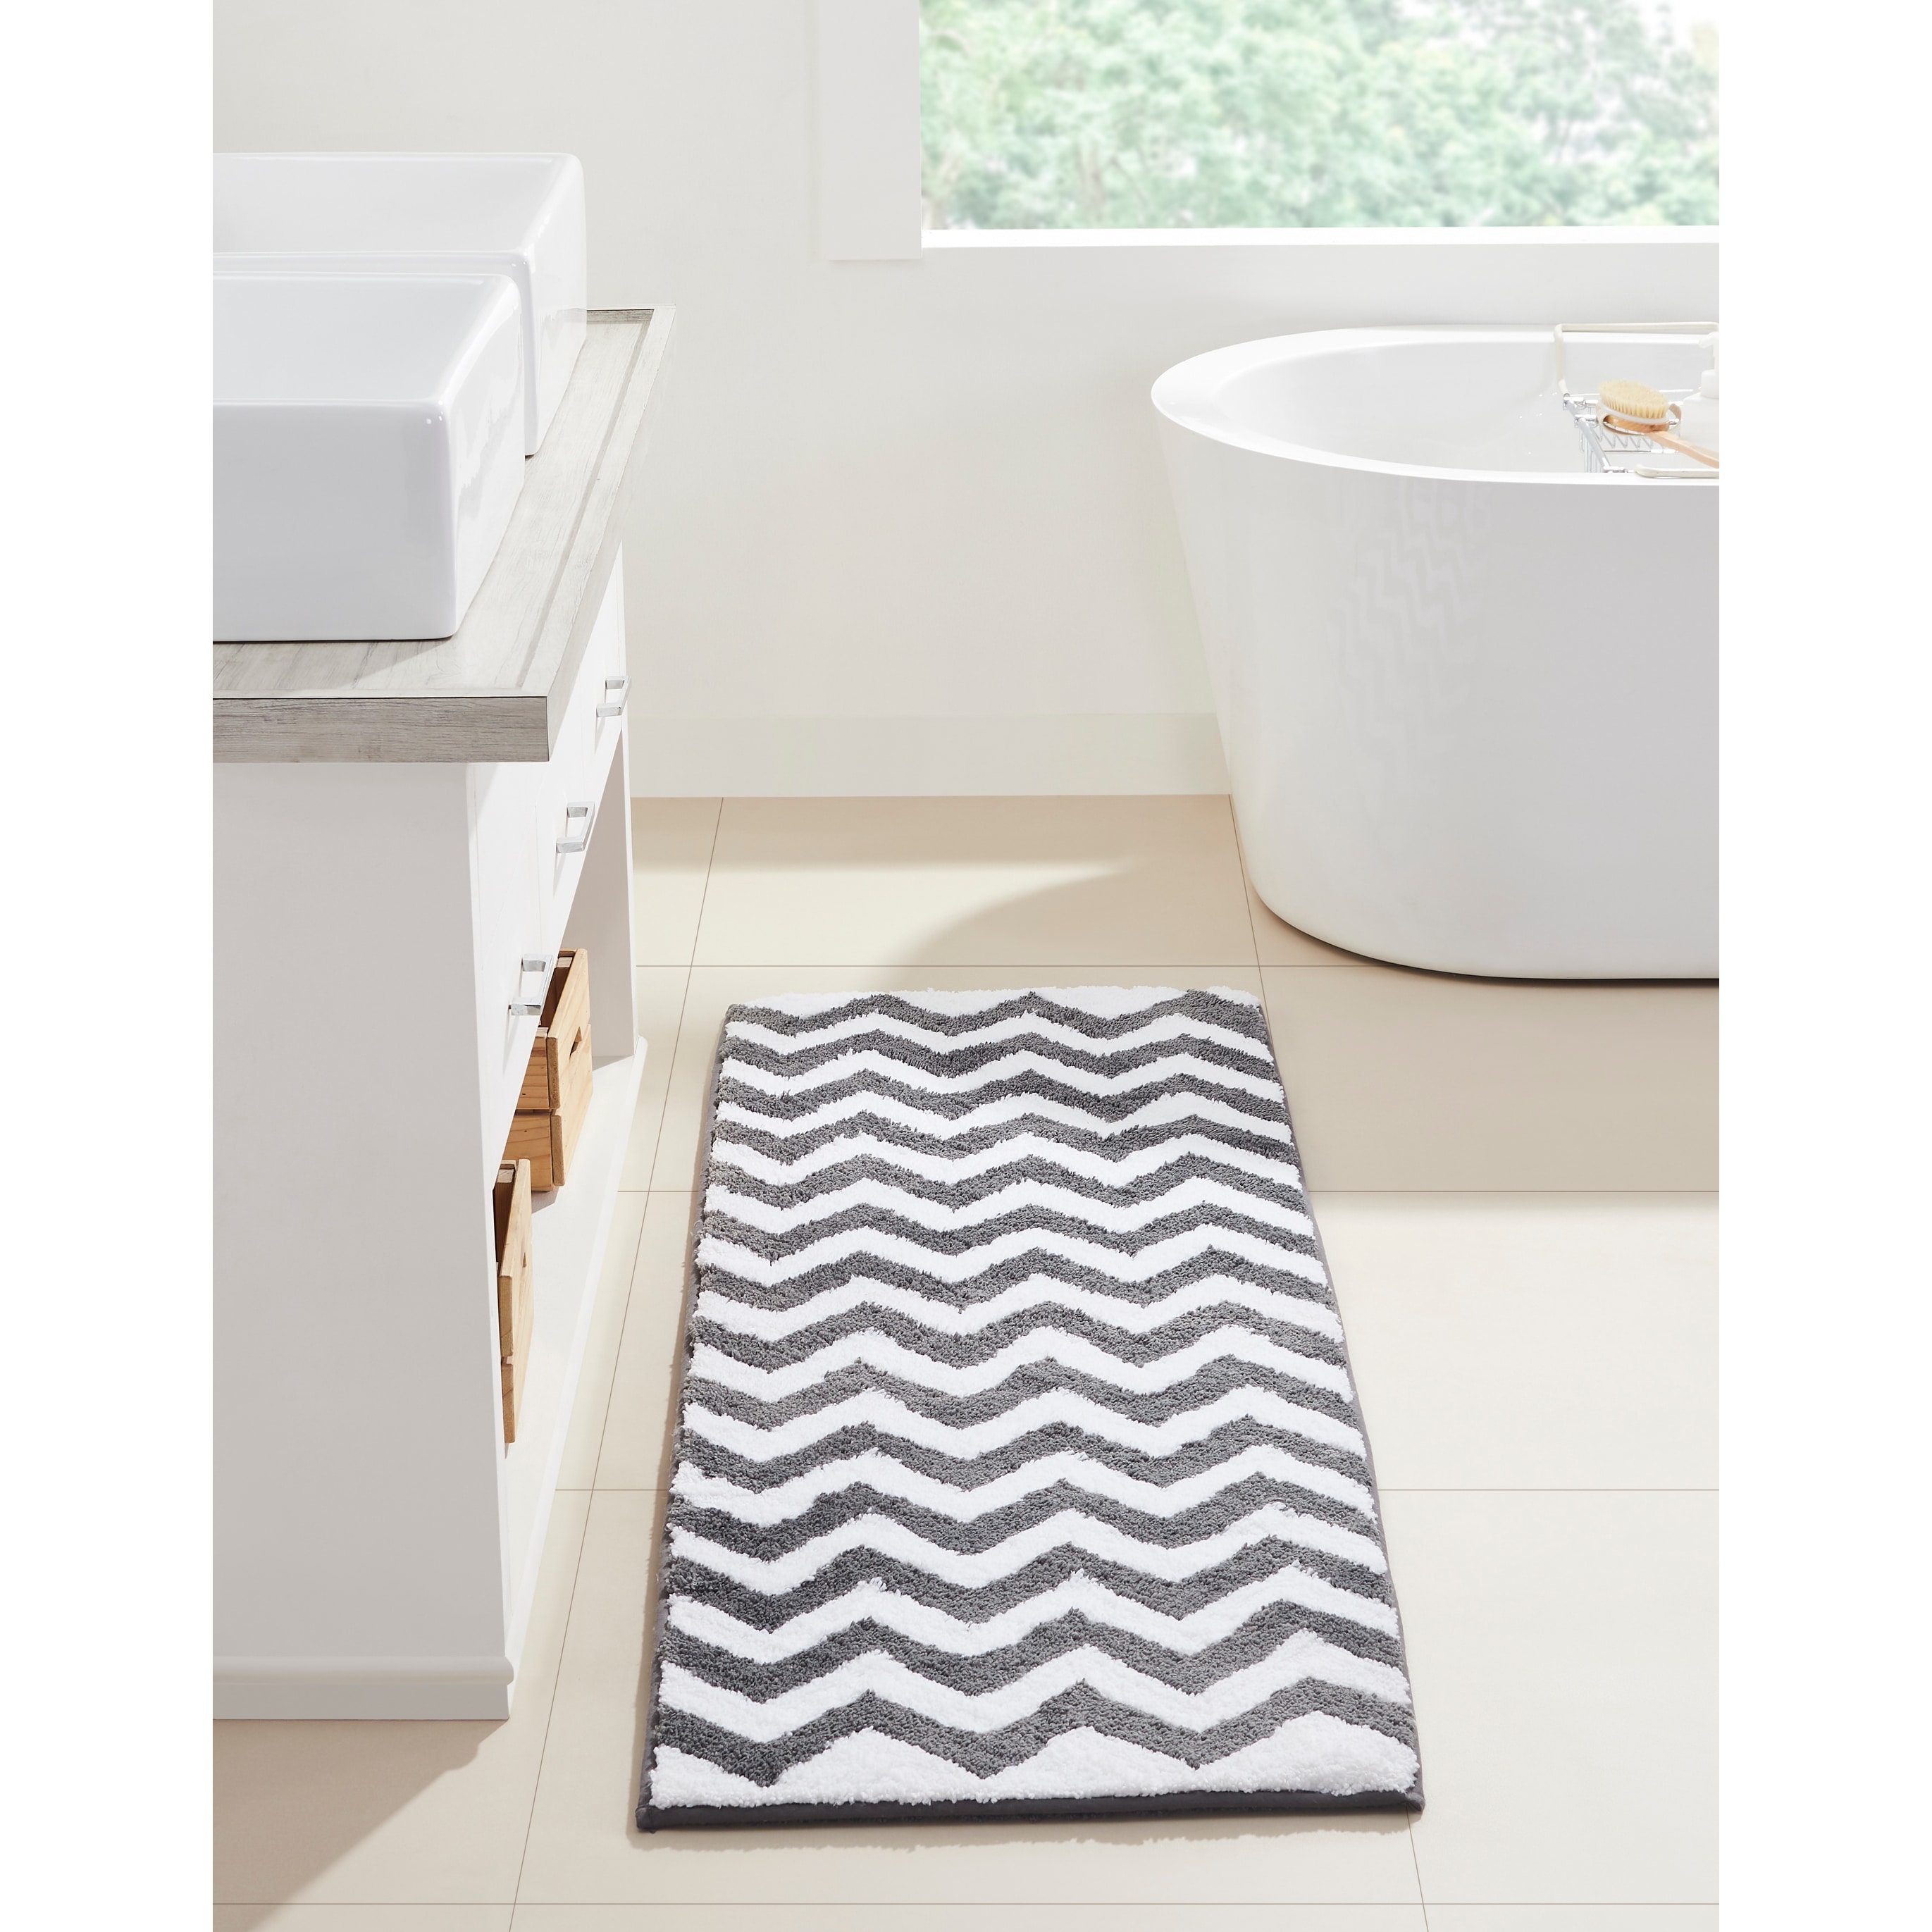 1pc Bathroom Non-slip Mat Kitchen/bedroom/toilet Floor Mat With Water  Separation Feature For Shower & Home Use, Anti-slip Patchwork Design